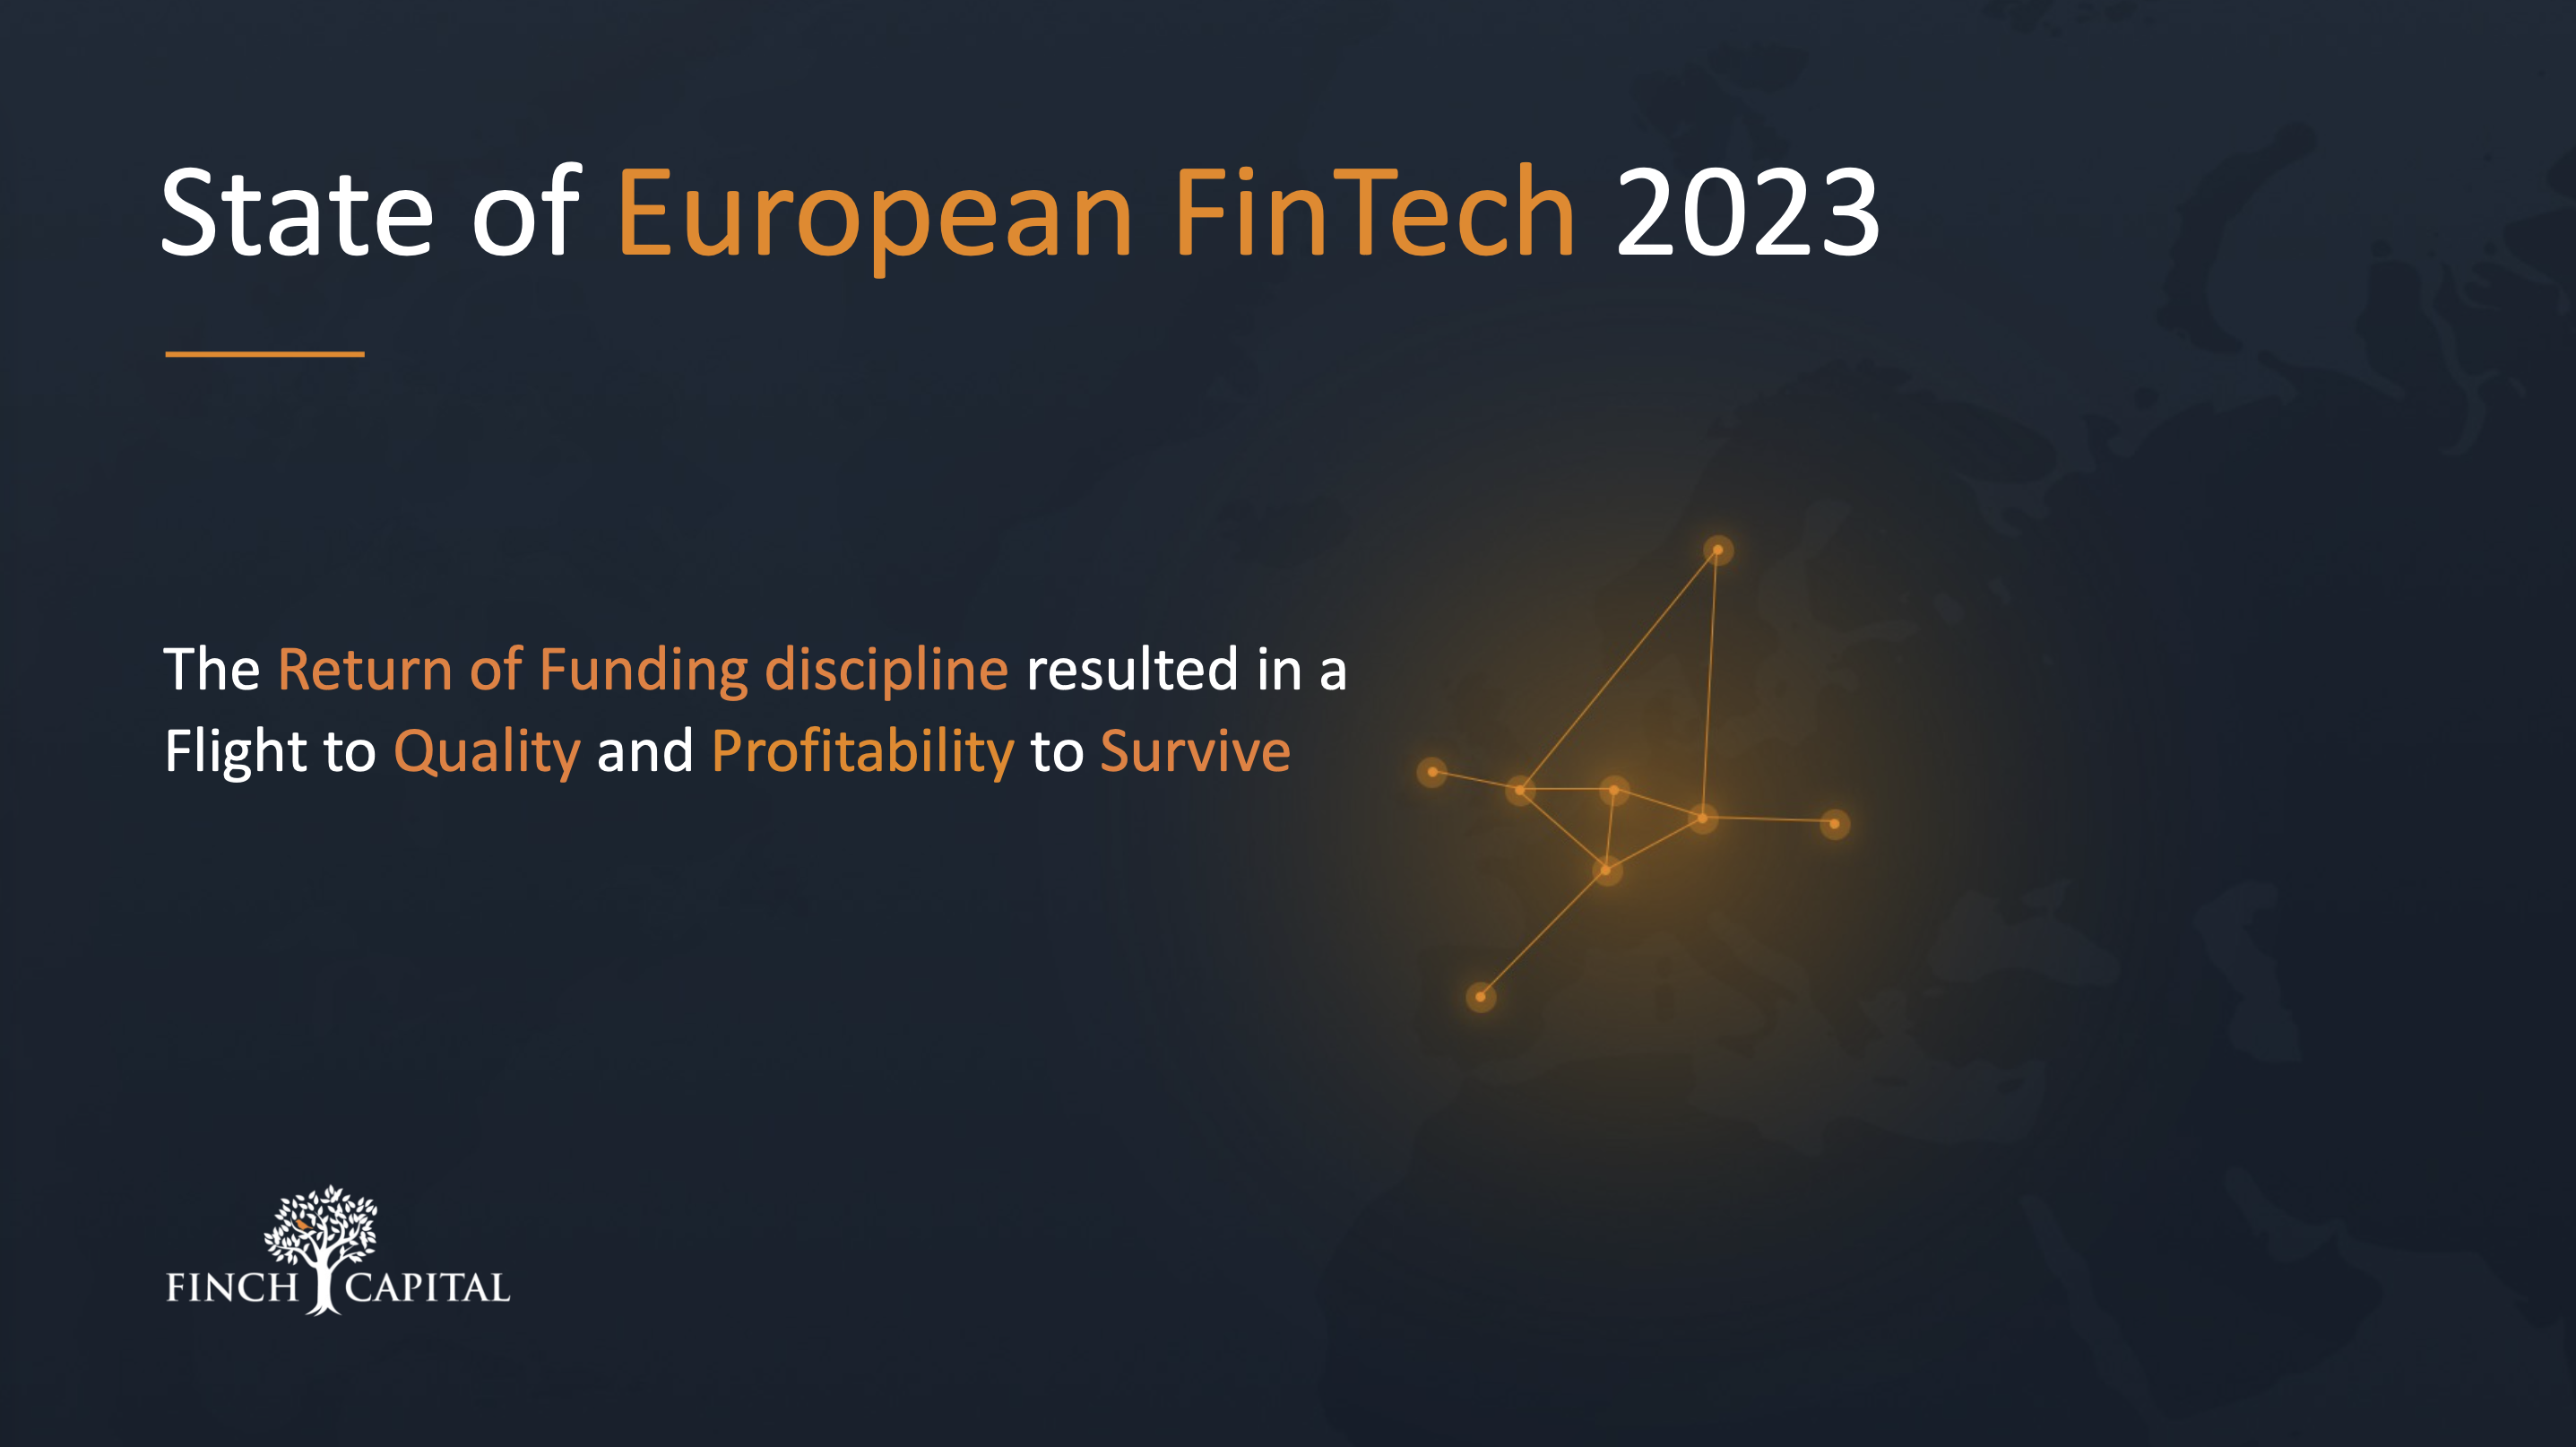 Finch Capital launches 8th Annual State of European FinTech Report 2023.